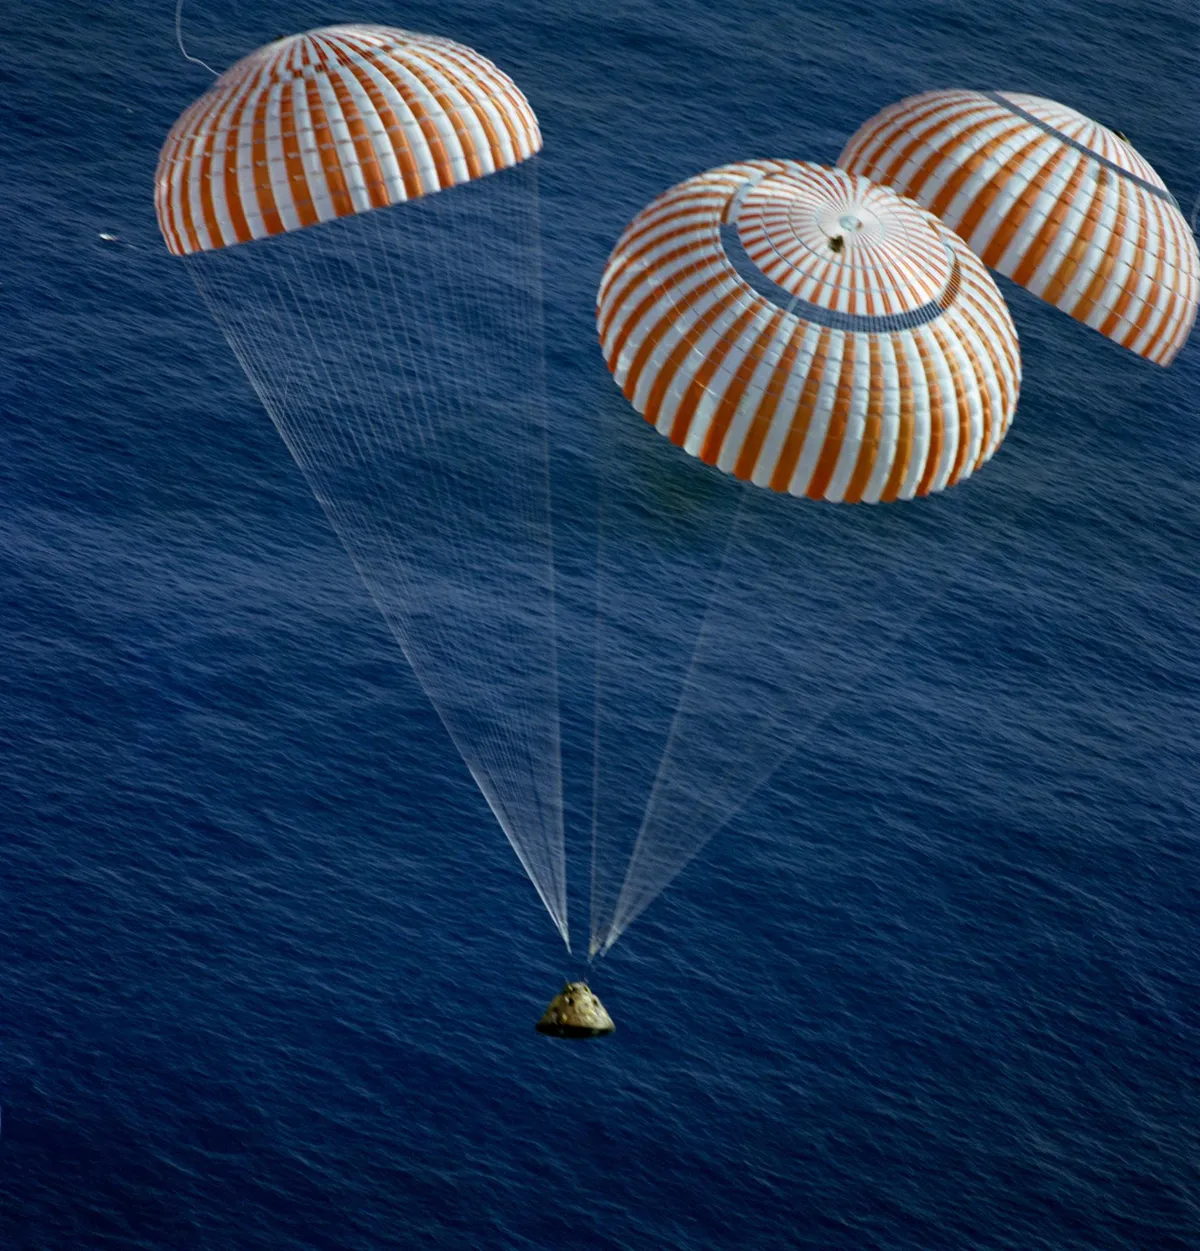 The final descent,19 December 1972. The Apollo 17 Command Module, with astronauts Eugene A Cernan, Ronald E Evans and Harrison H Schmitt aboard, nears splashdown in the south Pacific Ocean, successfully drawing the Apollo programme to a close.Credit: NASA